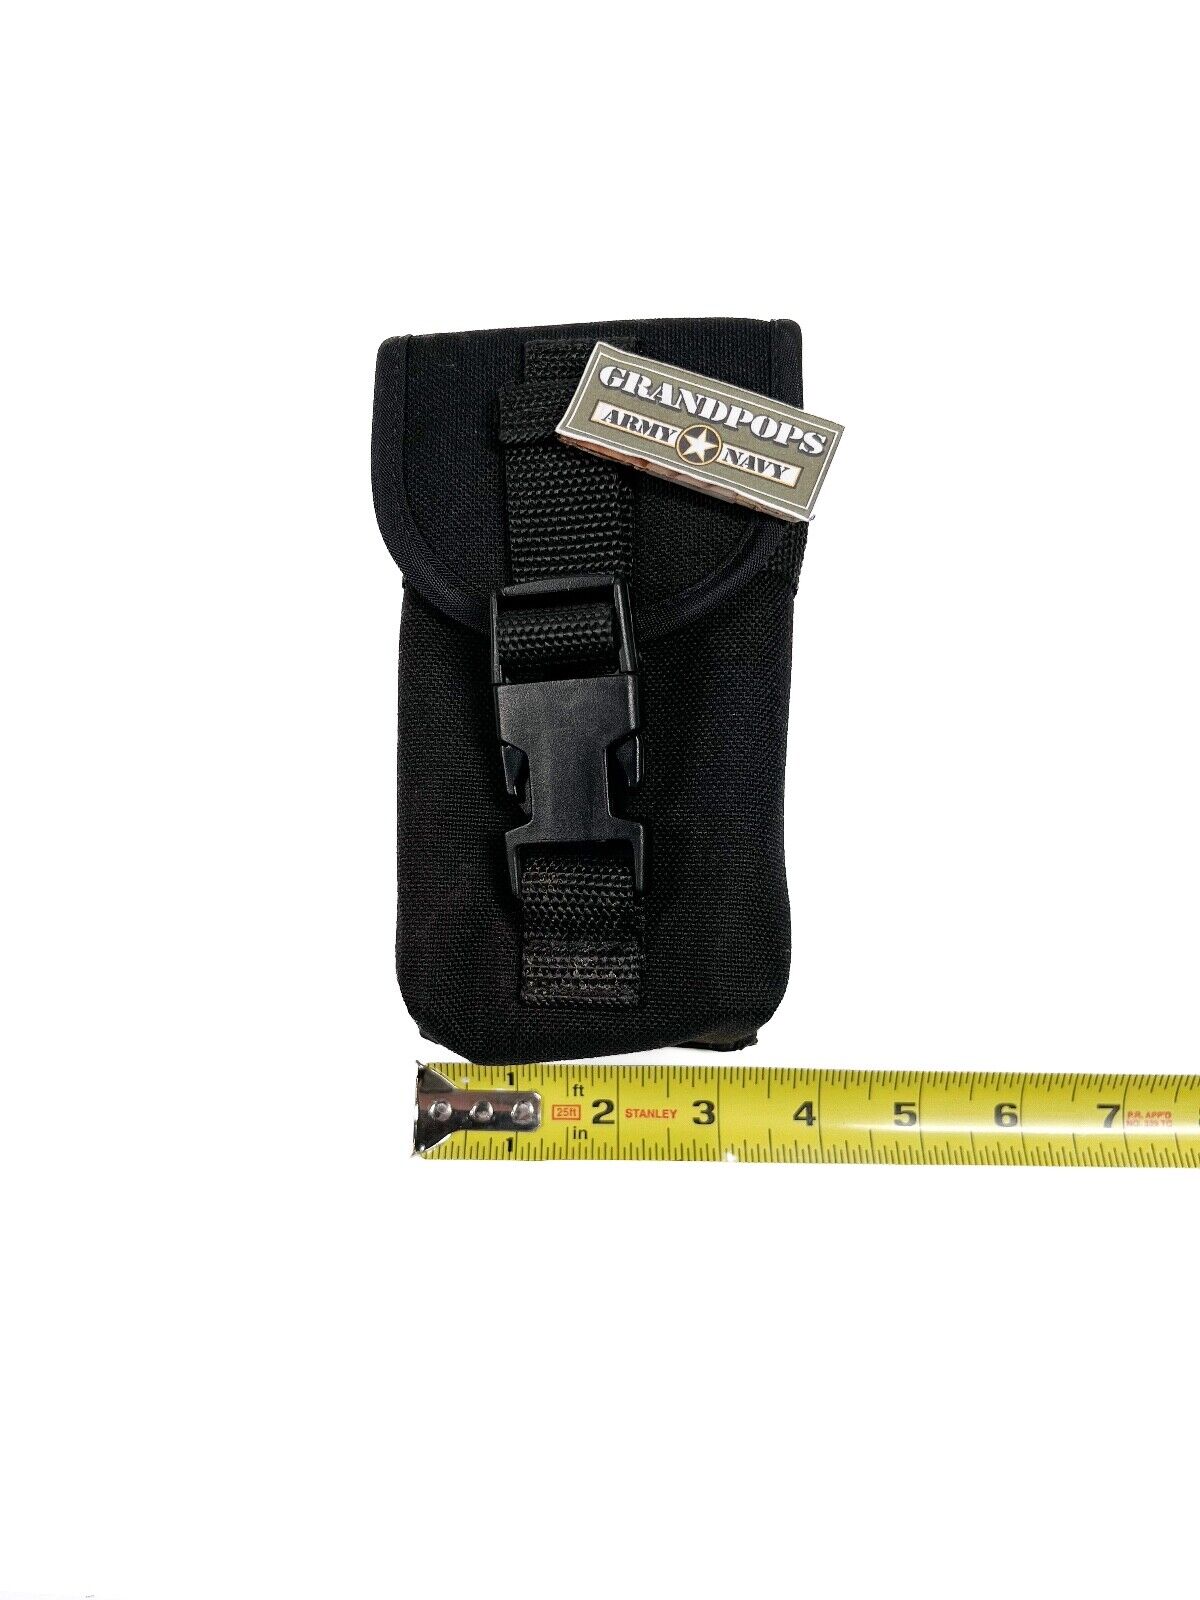 BELT POUCH, Made in USA